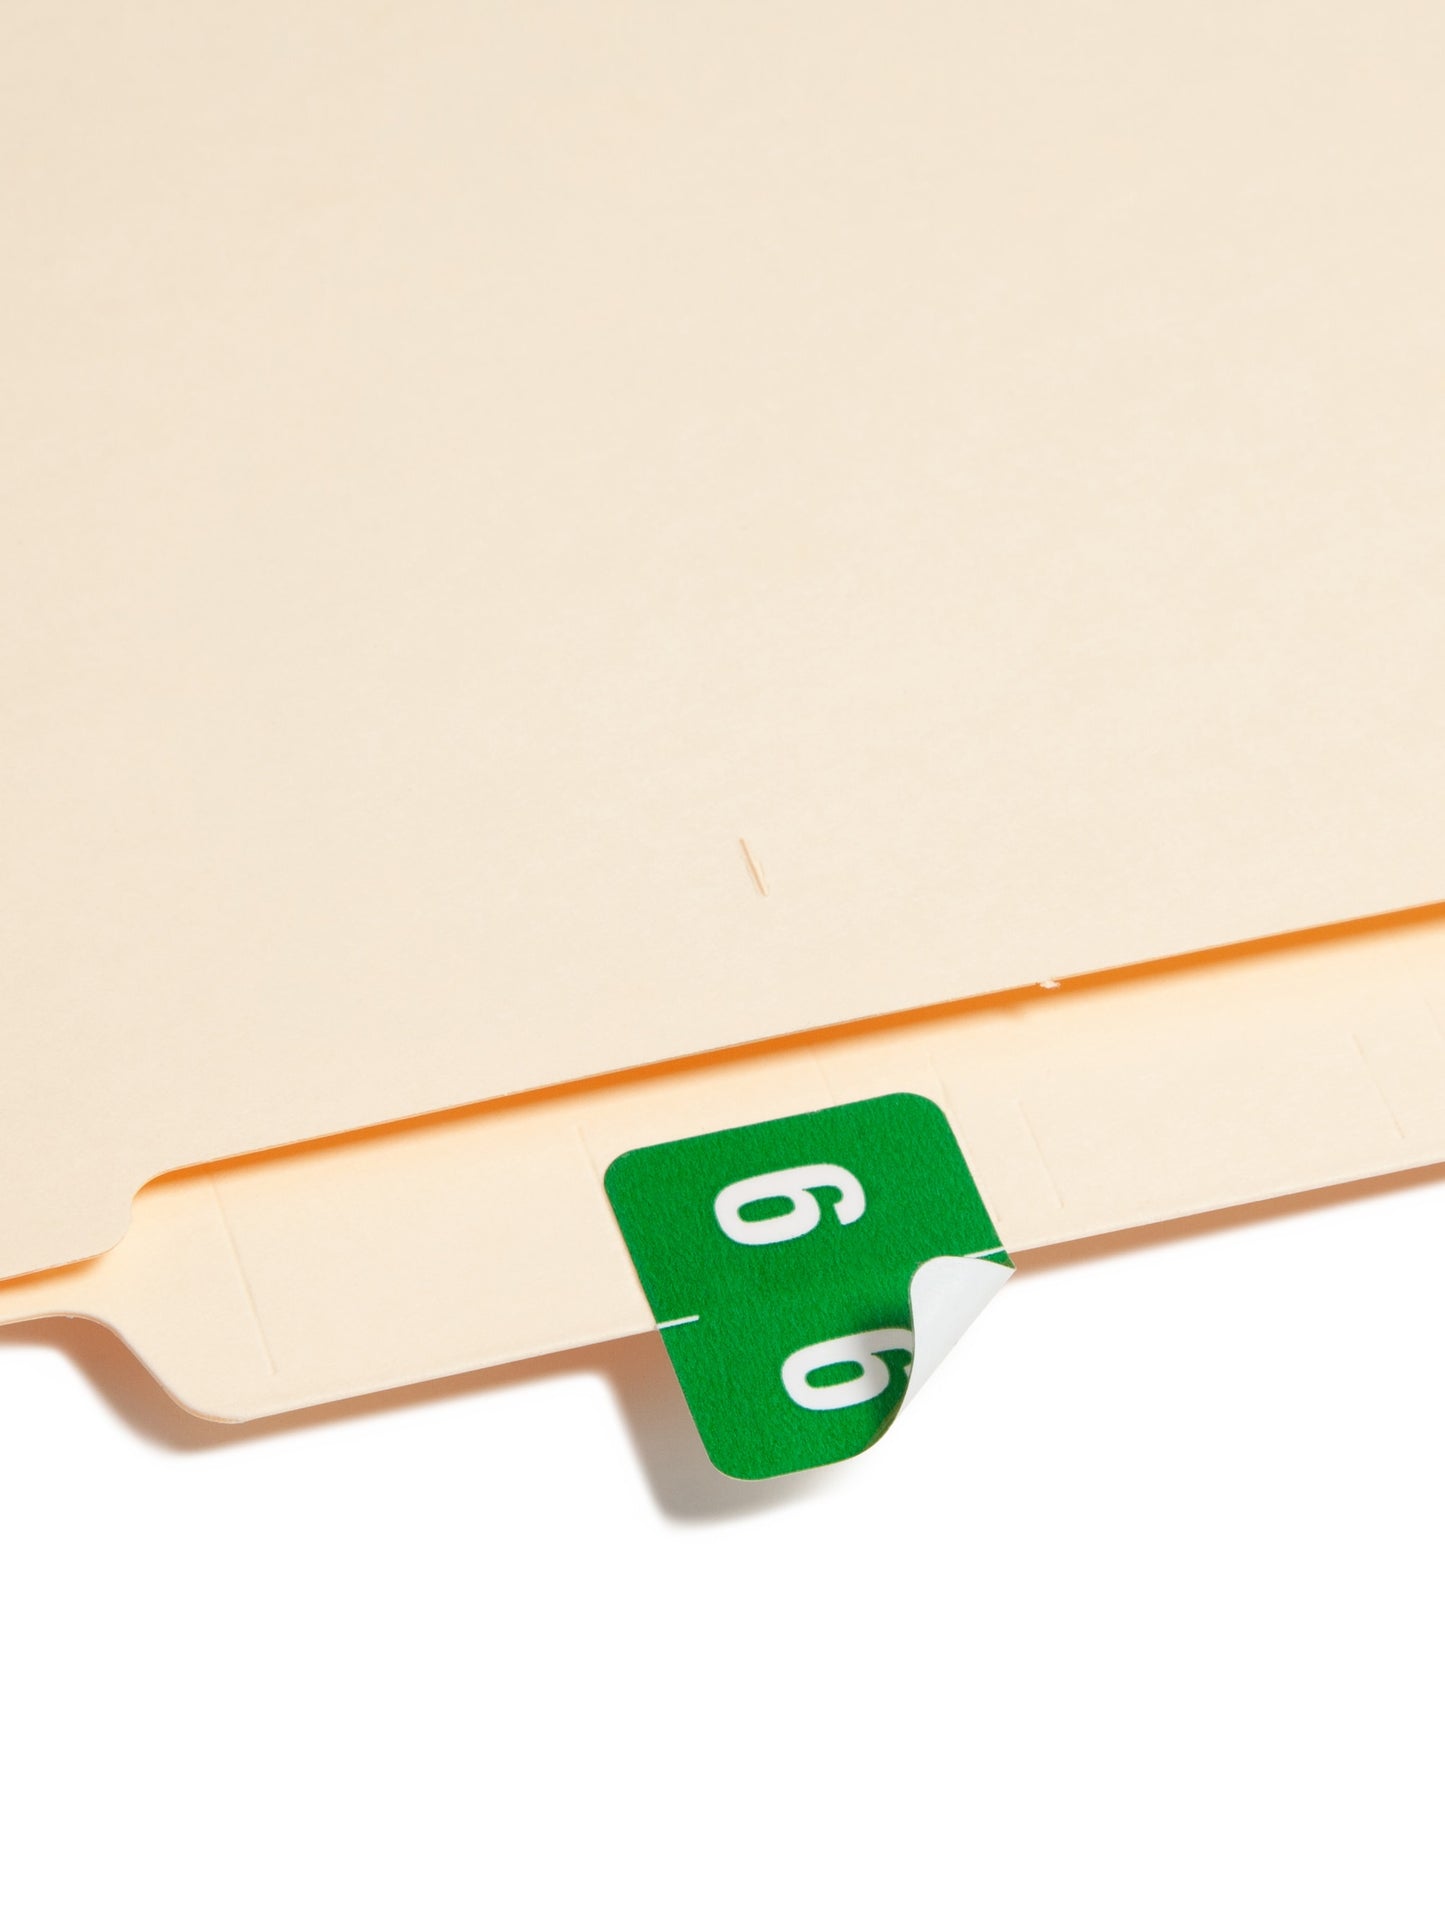 DCCRN Color-Coded Numeric Labels - Rolls, Green Color, 1-1/4" X 1" Size, Set of 1, 086486673464